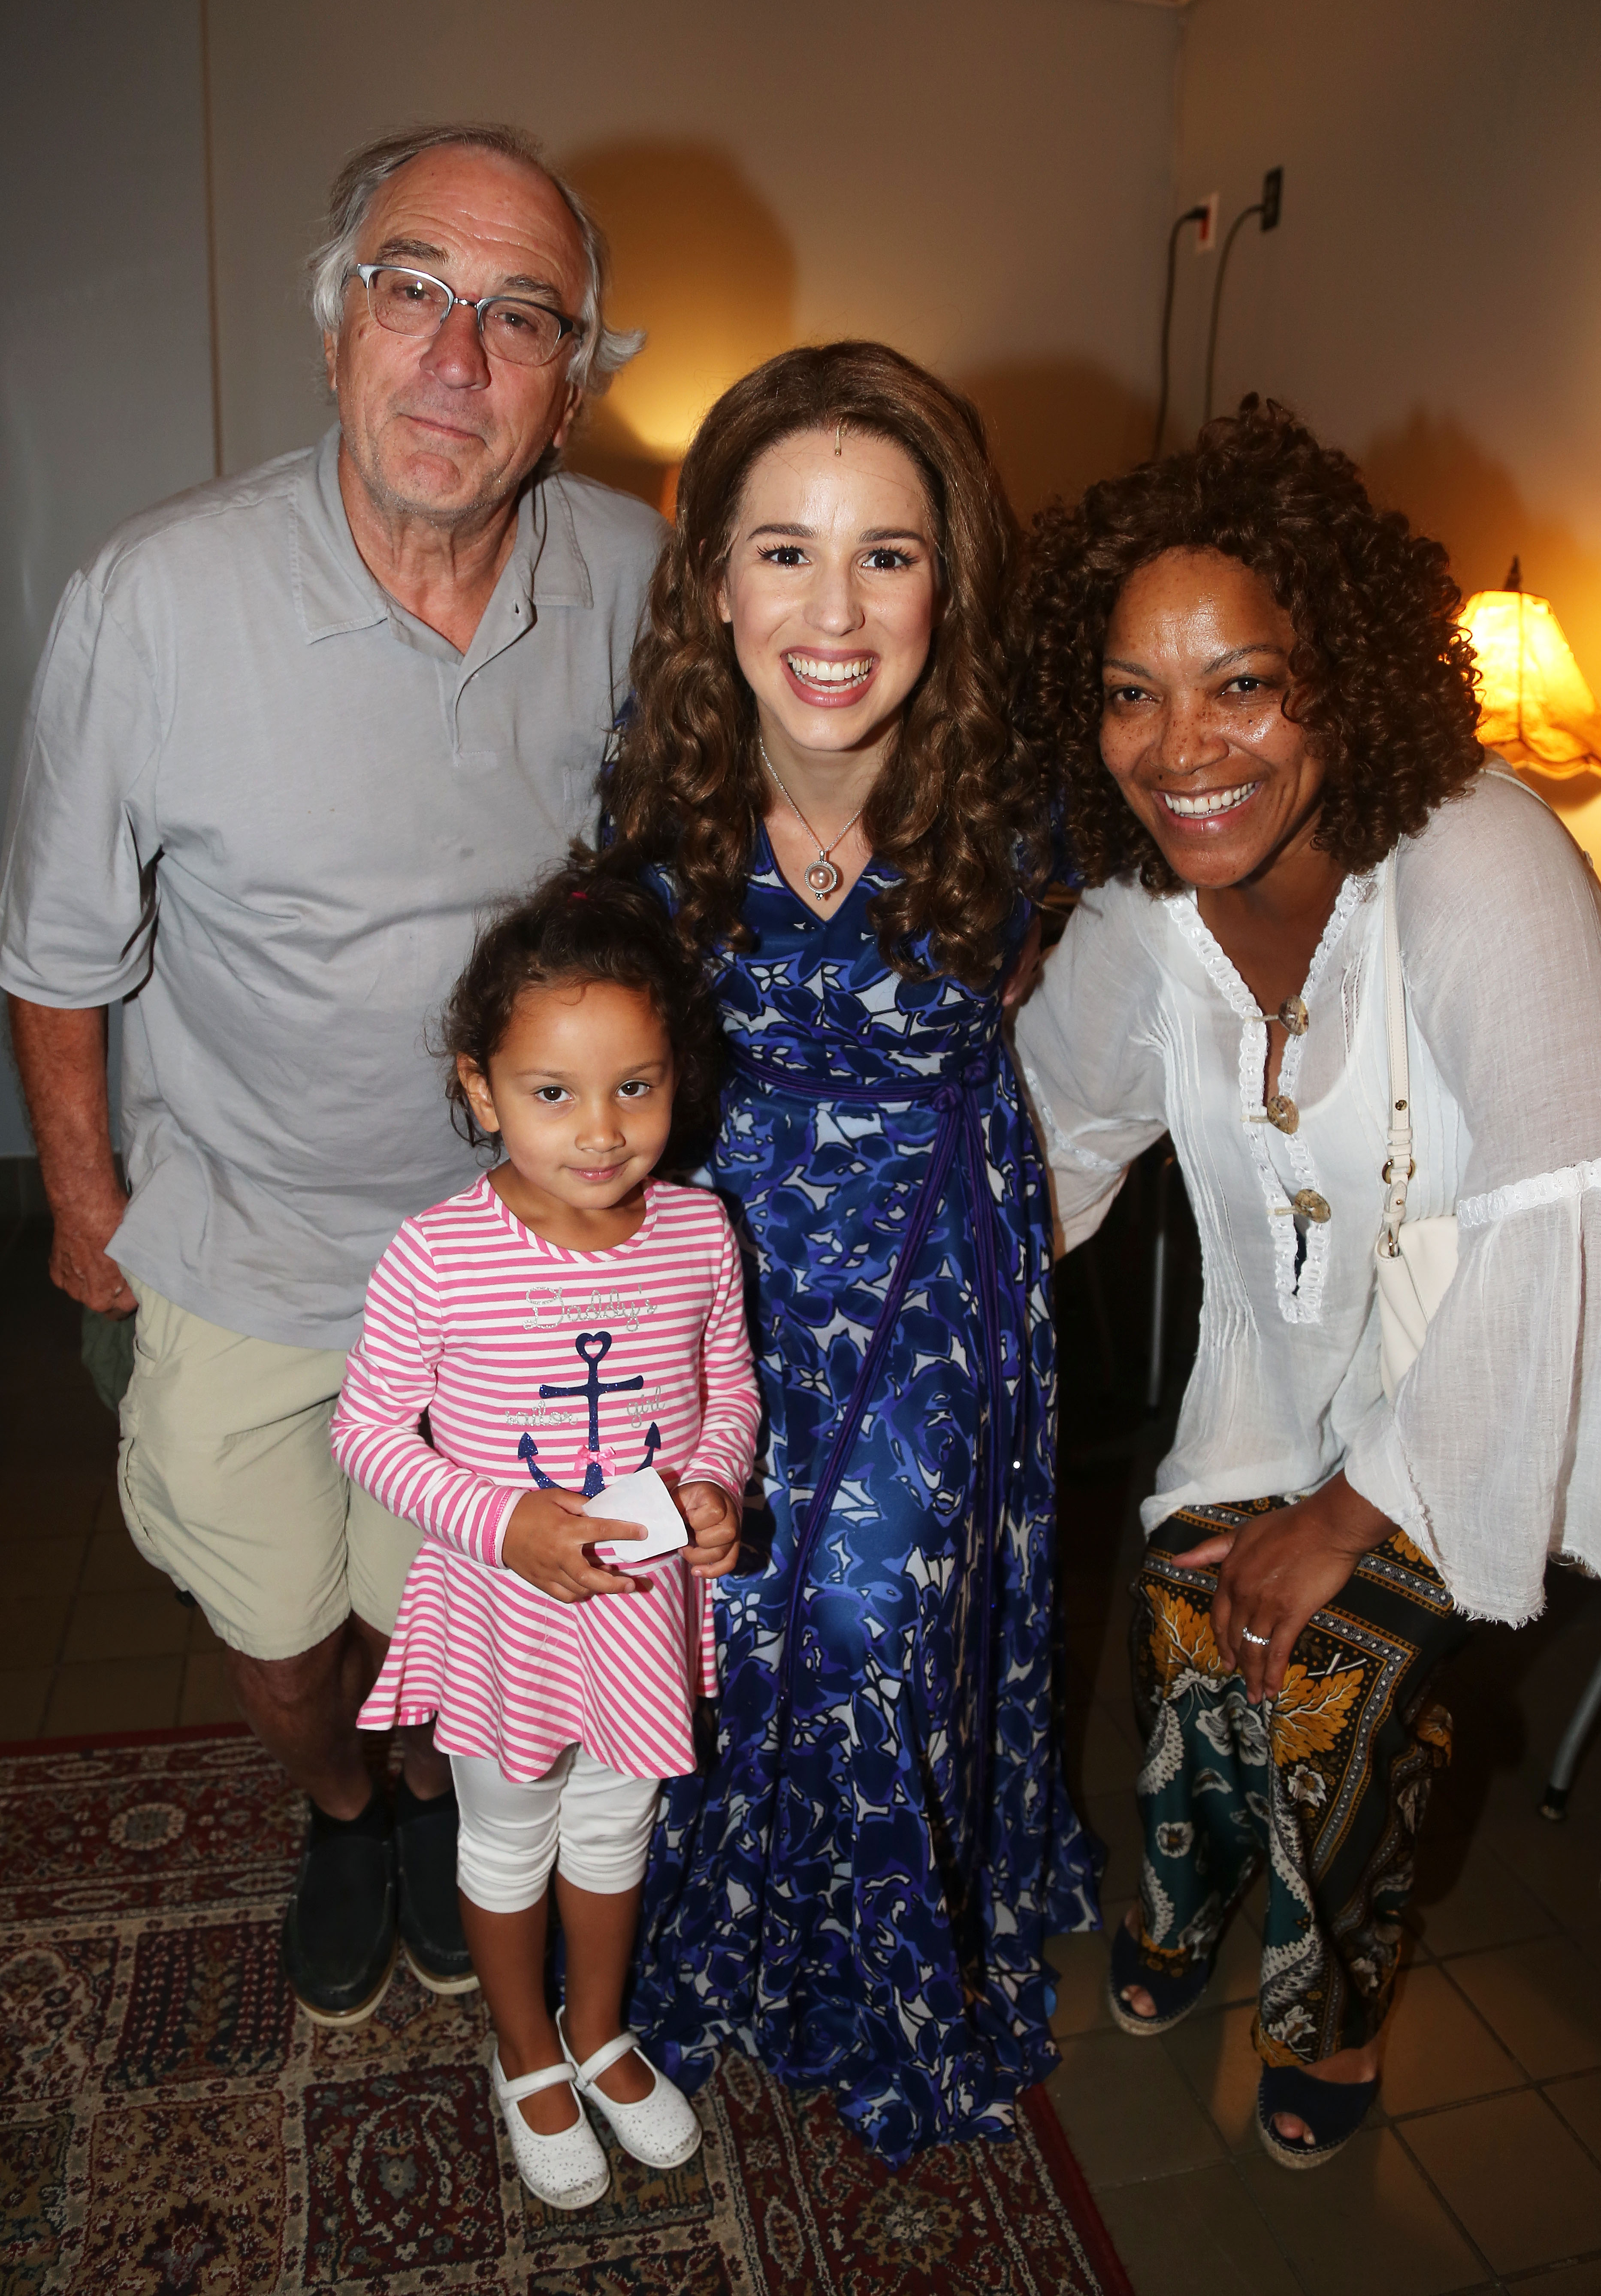 Robert De Niro, daughter Helen Grace, Chilina Kennedy, and Grace Hightower backstage at the "Beautiful" Broadway show in 2015 | Source: Getty Images